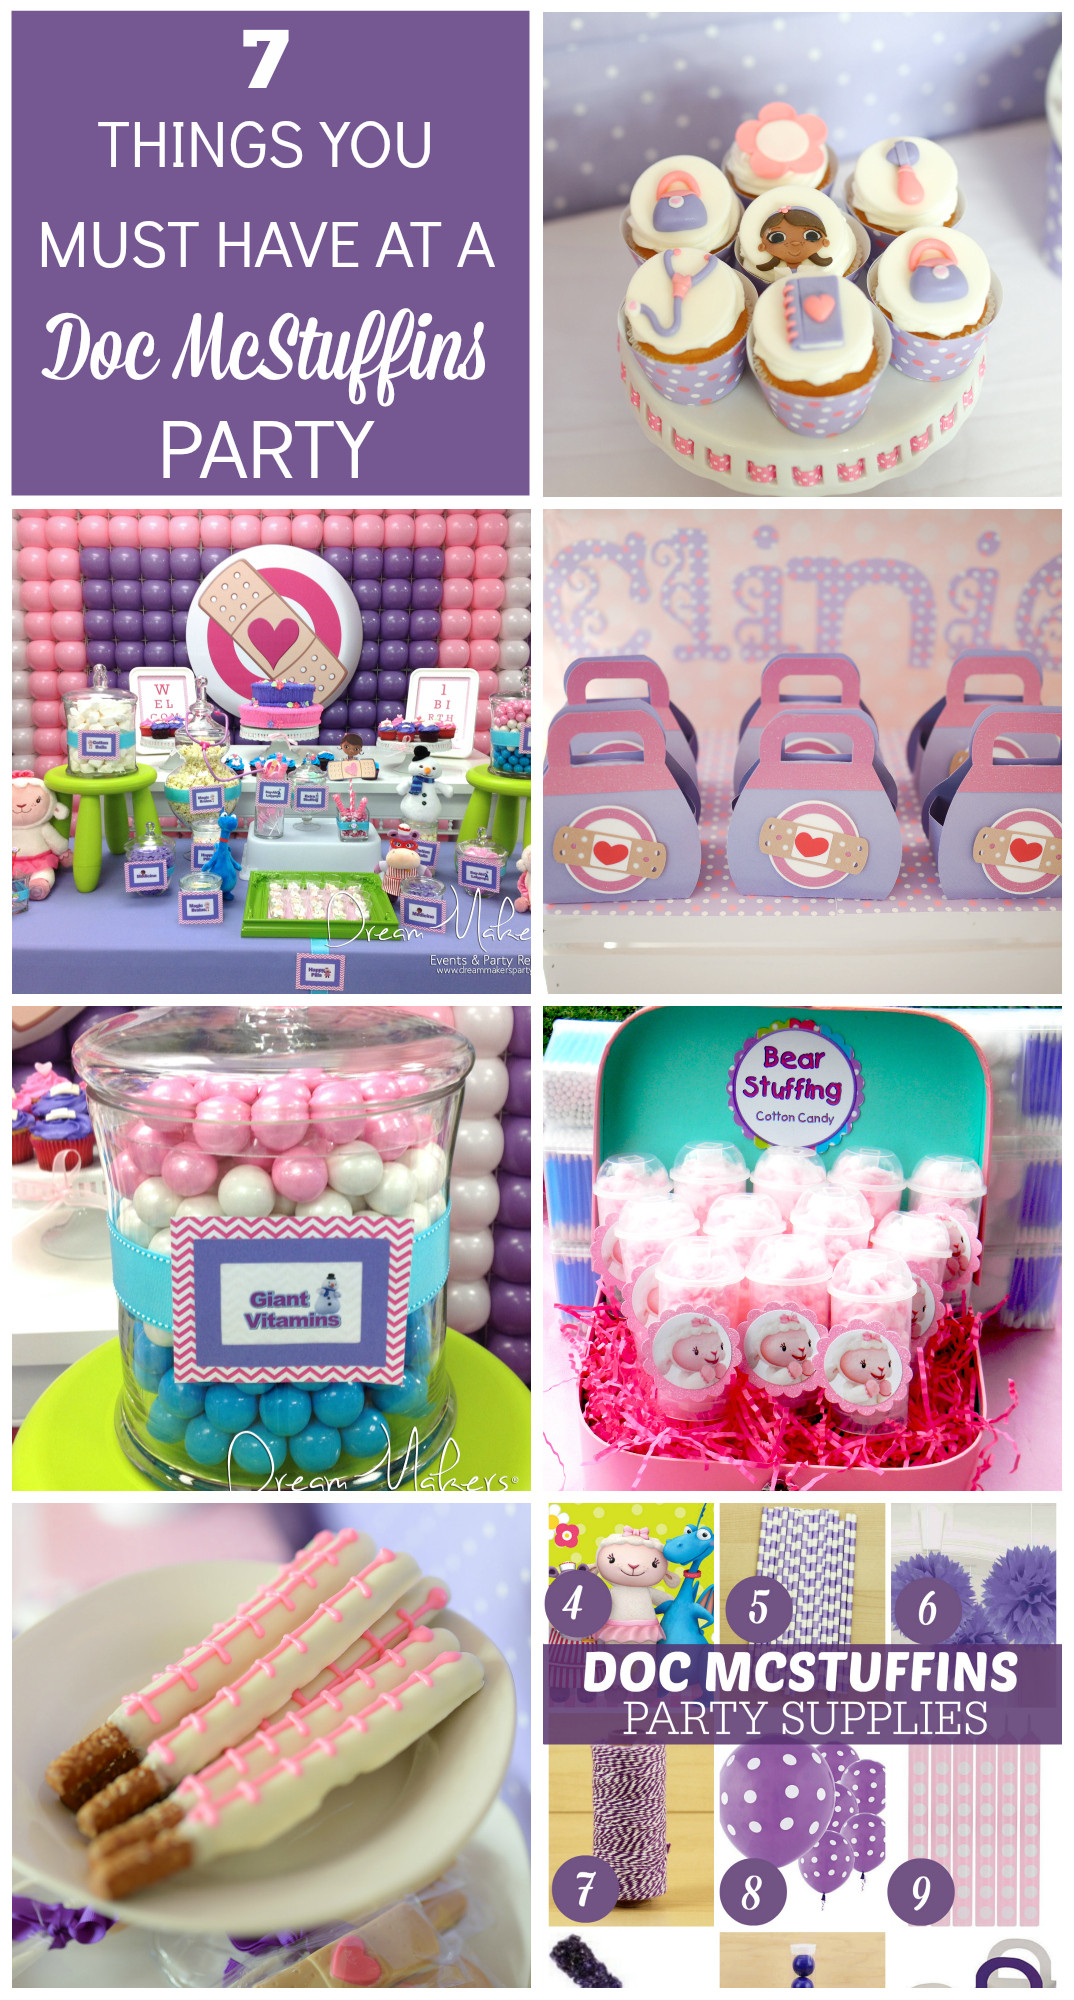 Doc Mcstuffin Birthday Party Ideas
 7 Things You Must Have at a Doc McStuffins Birthday Party